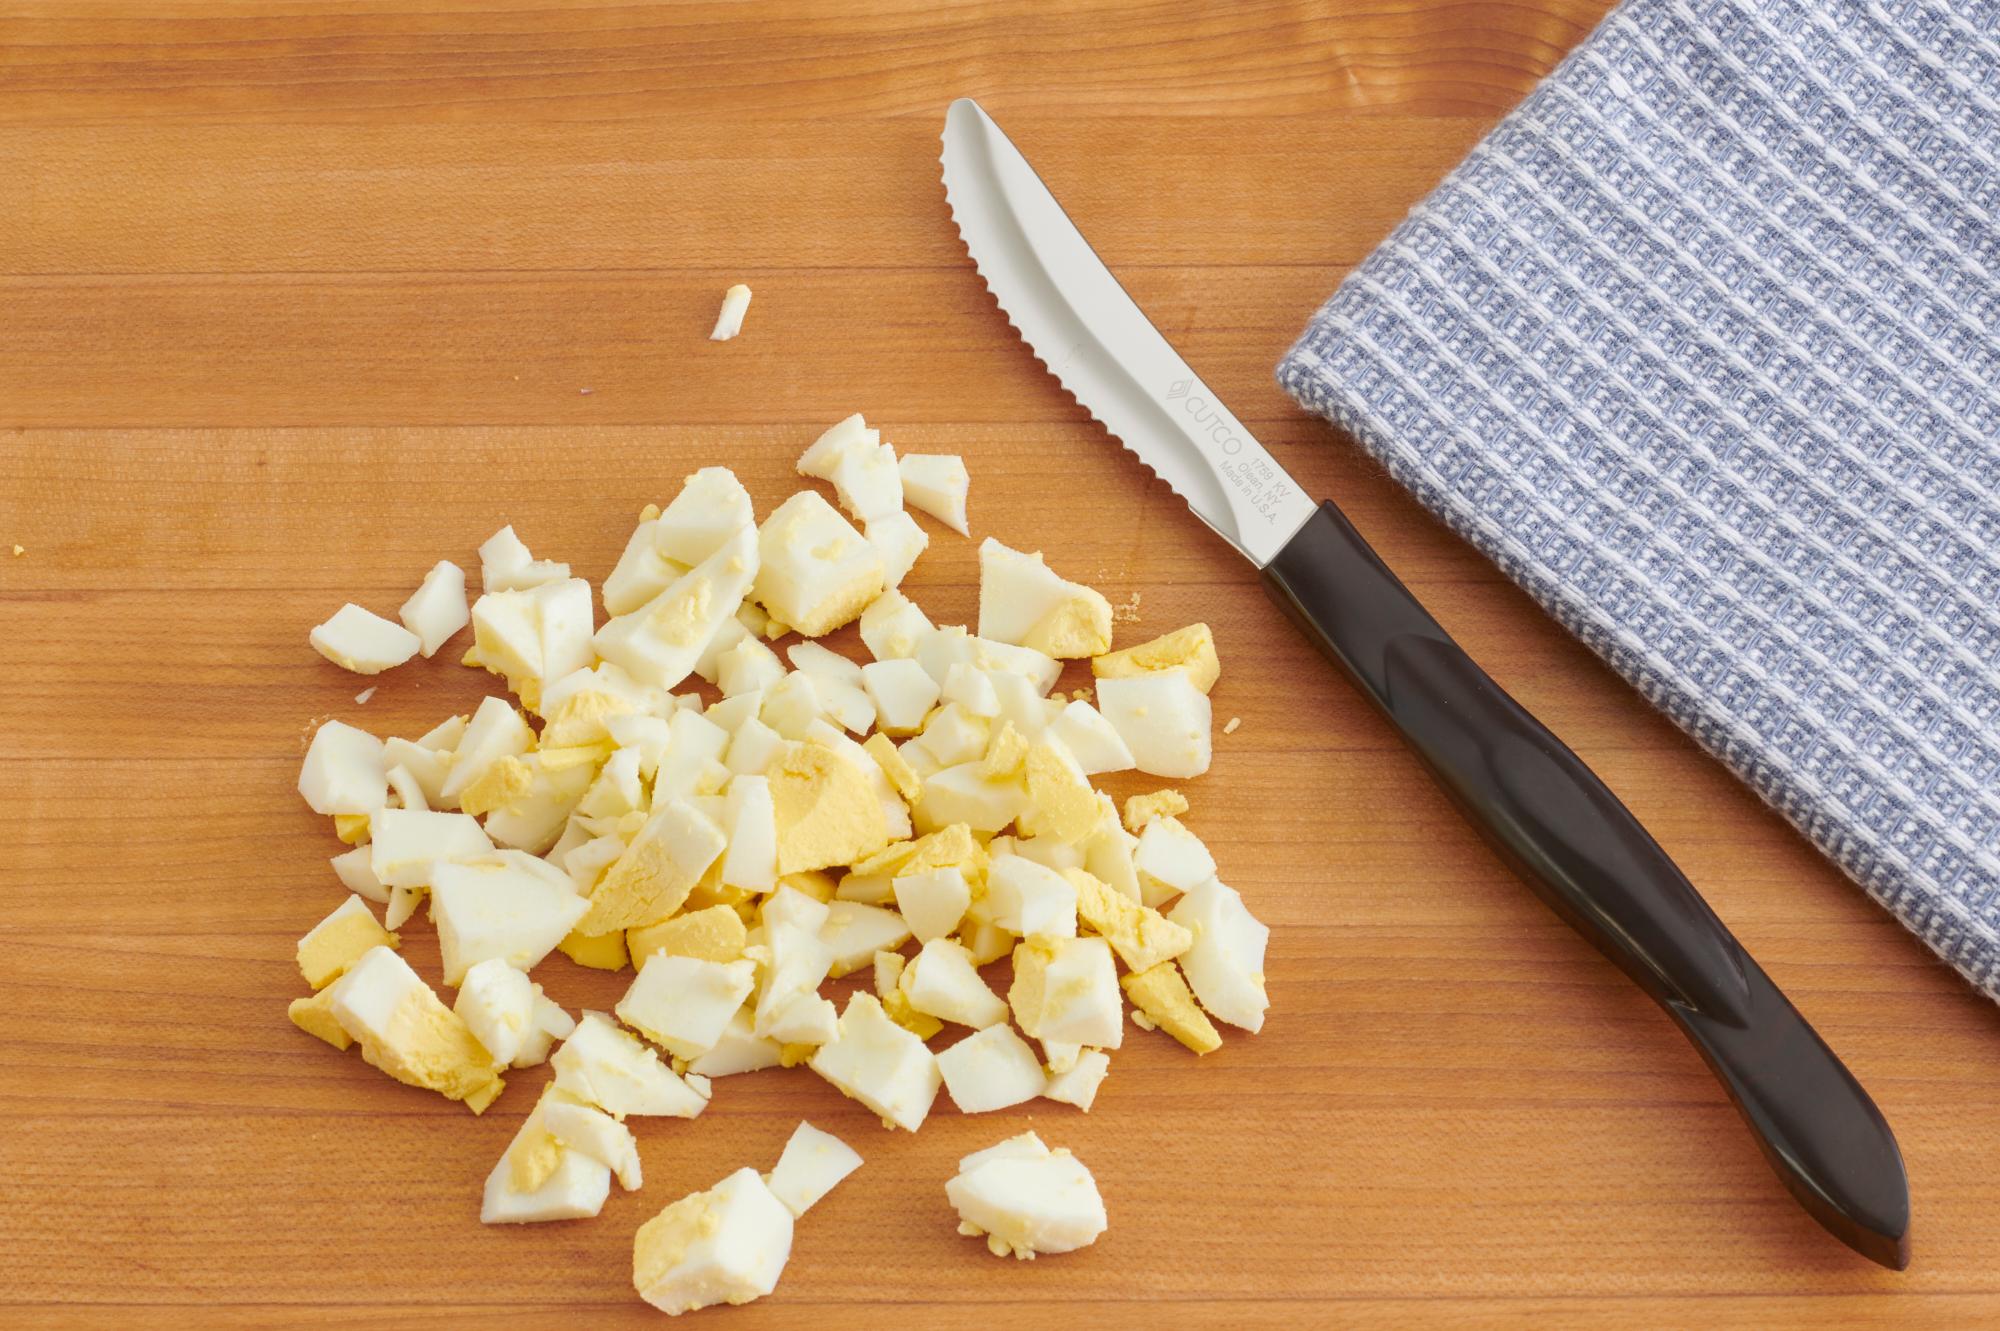 Use a Table Knife to cuts the eggs.